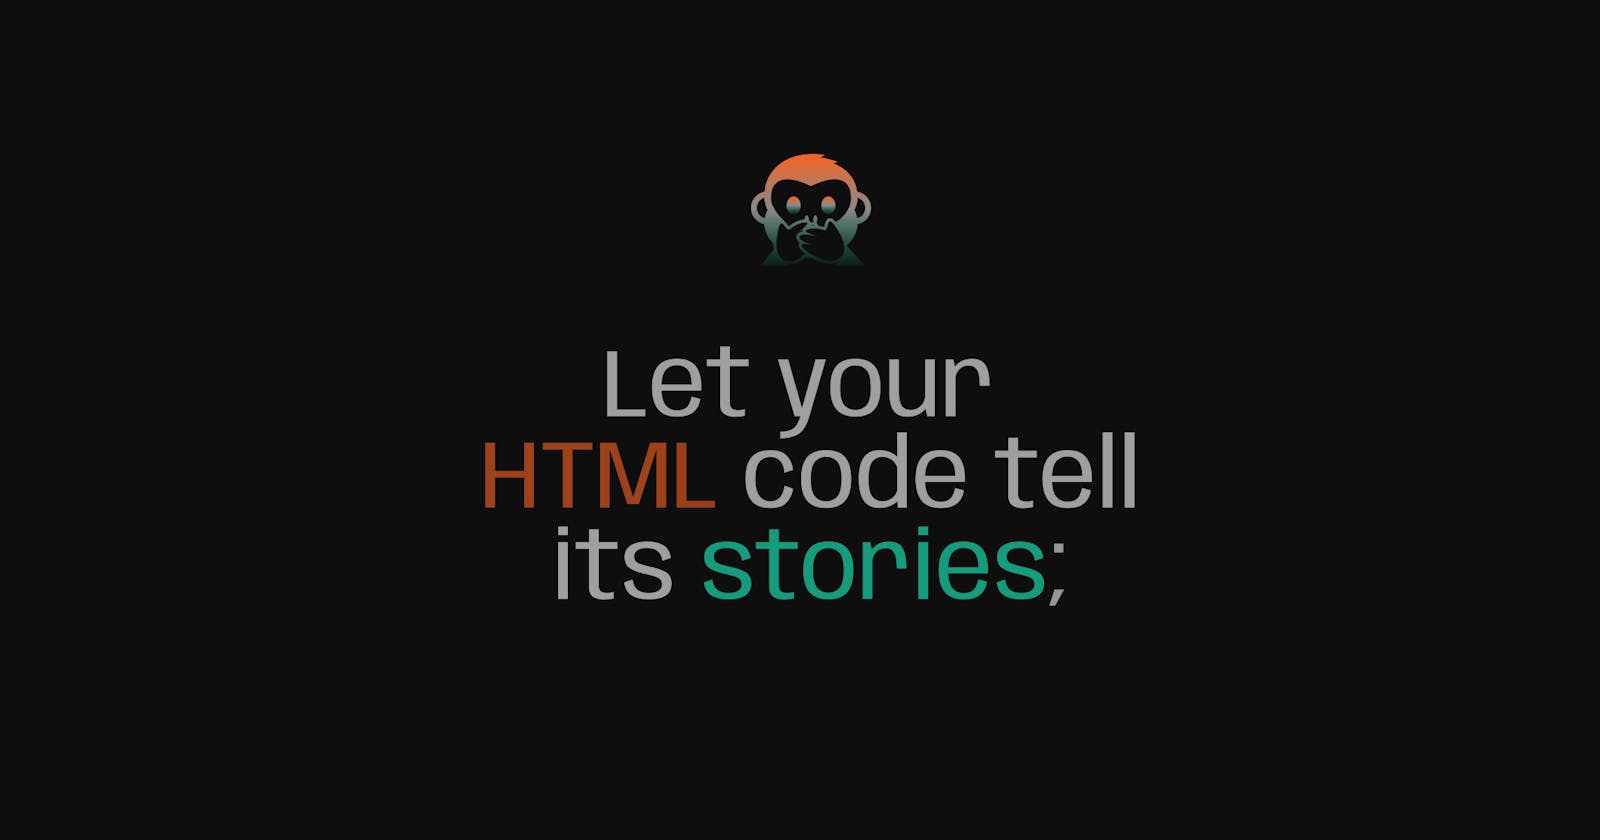 Semantic HTML: Let your code tell its stories